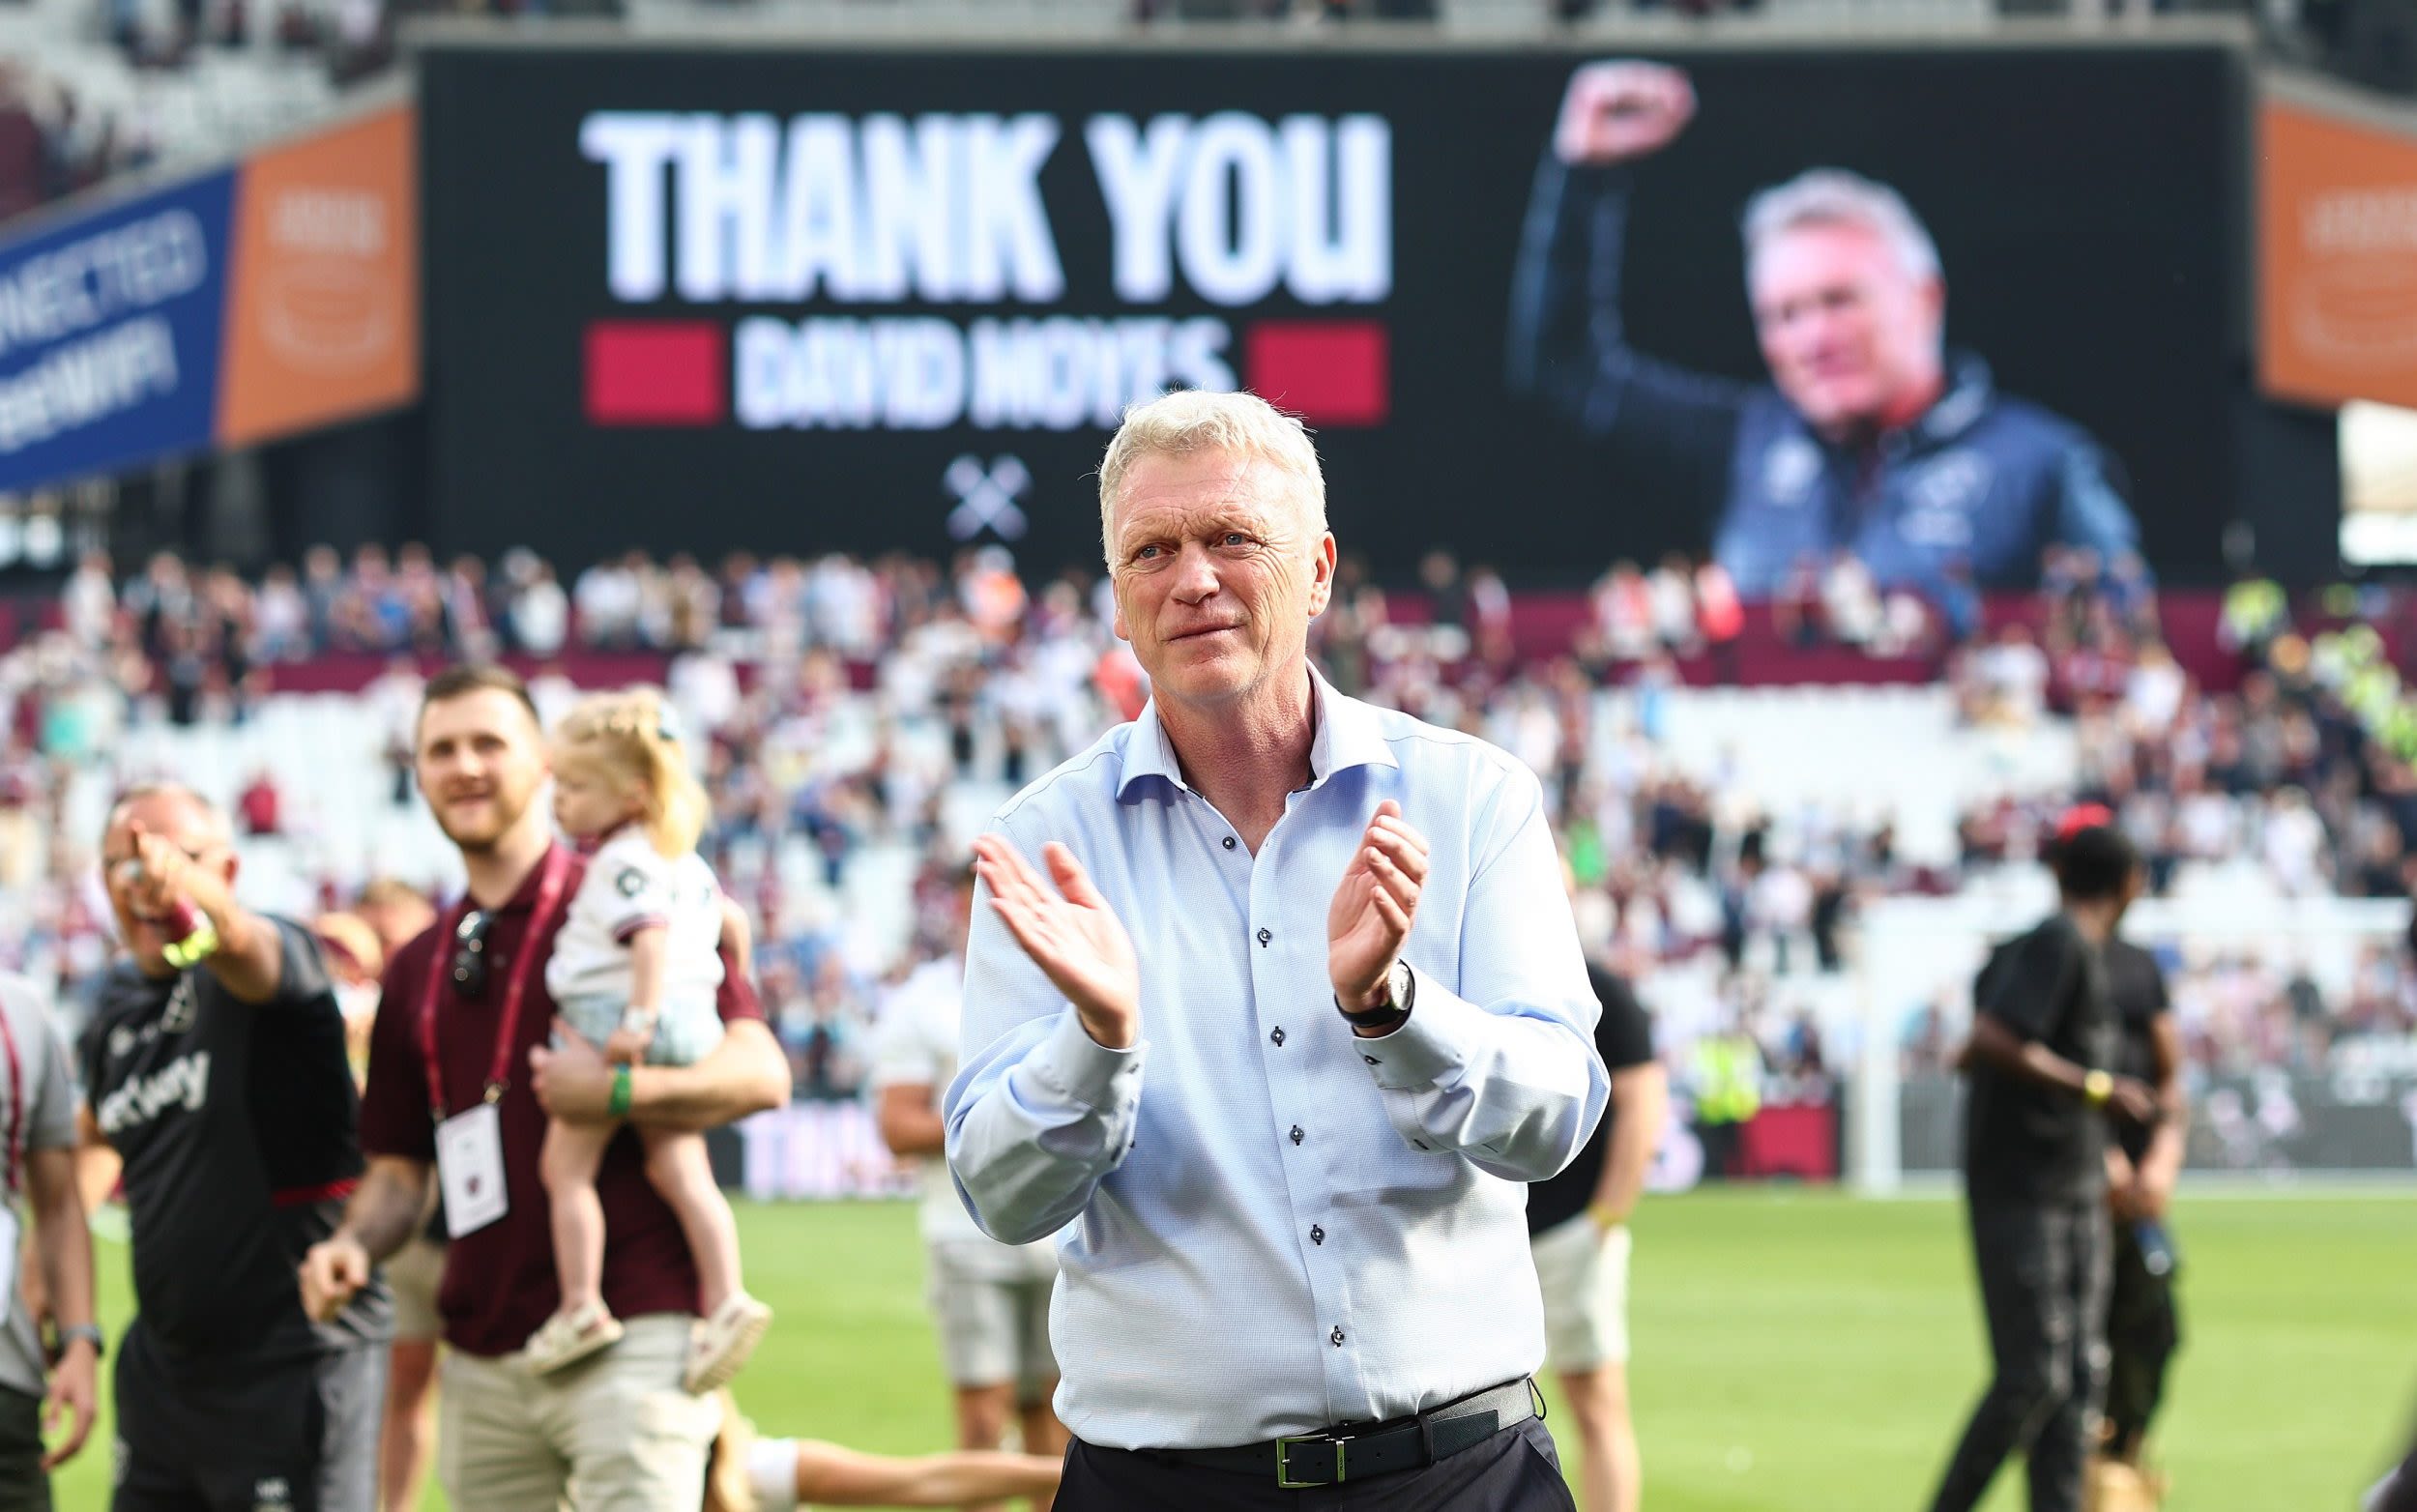 There will be no Klopp-like festival, but David Moyes deserves an appreciative farewell